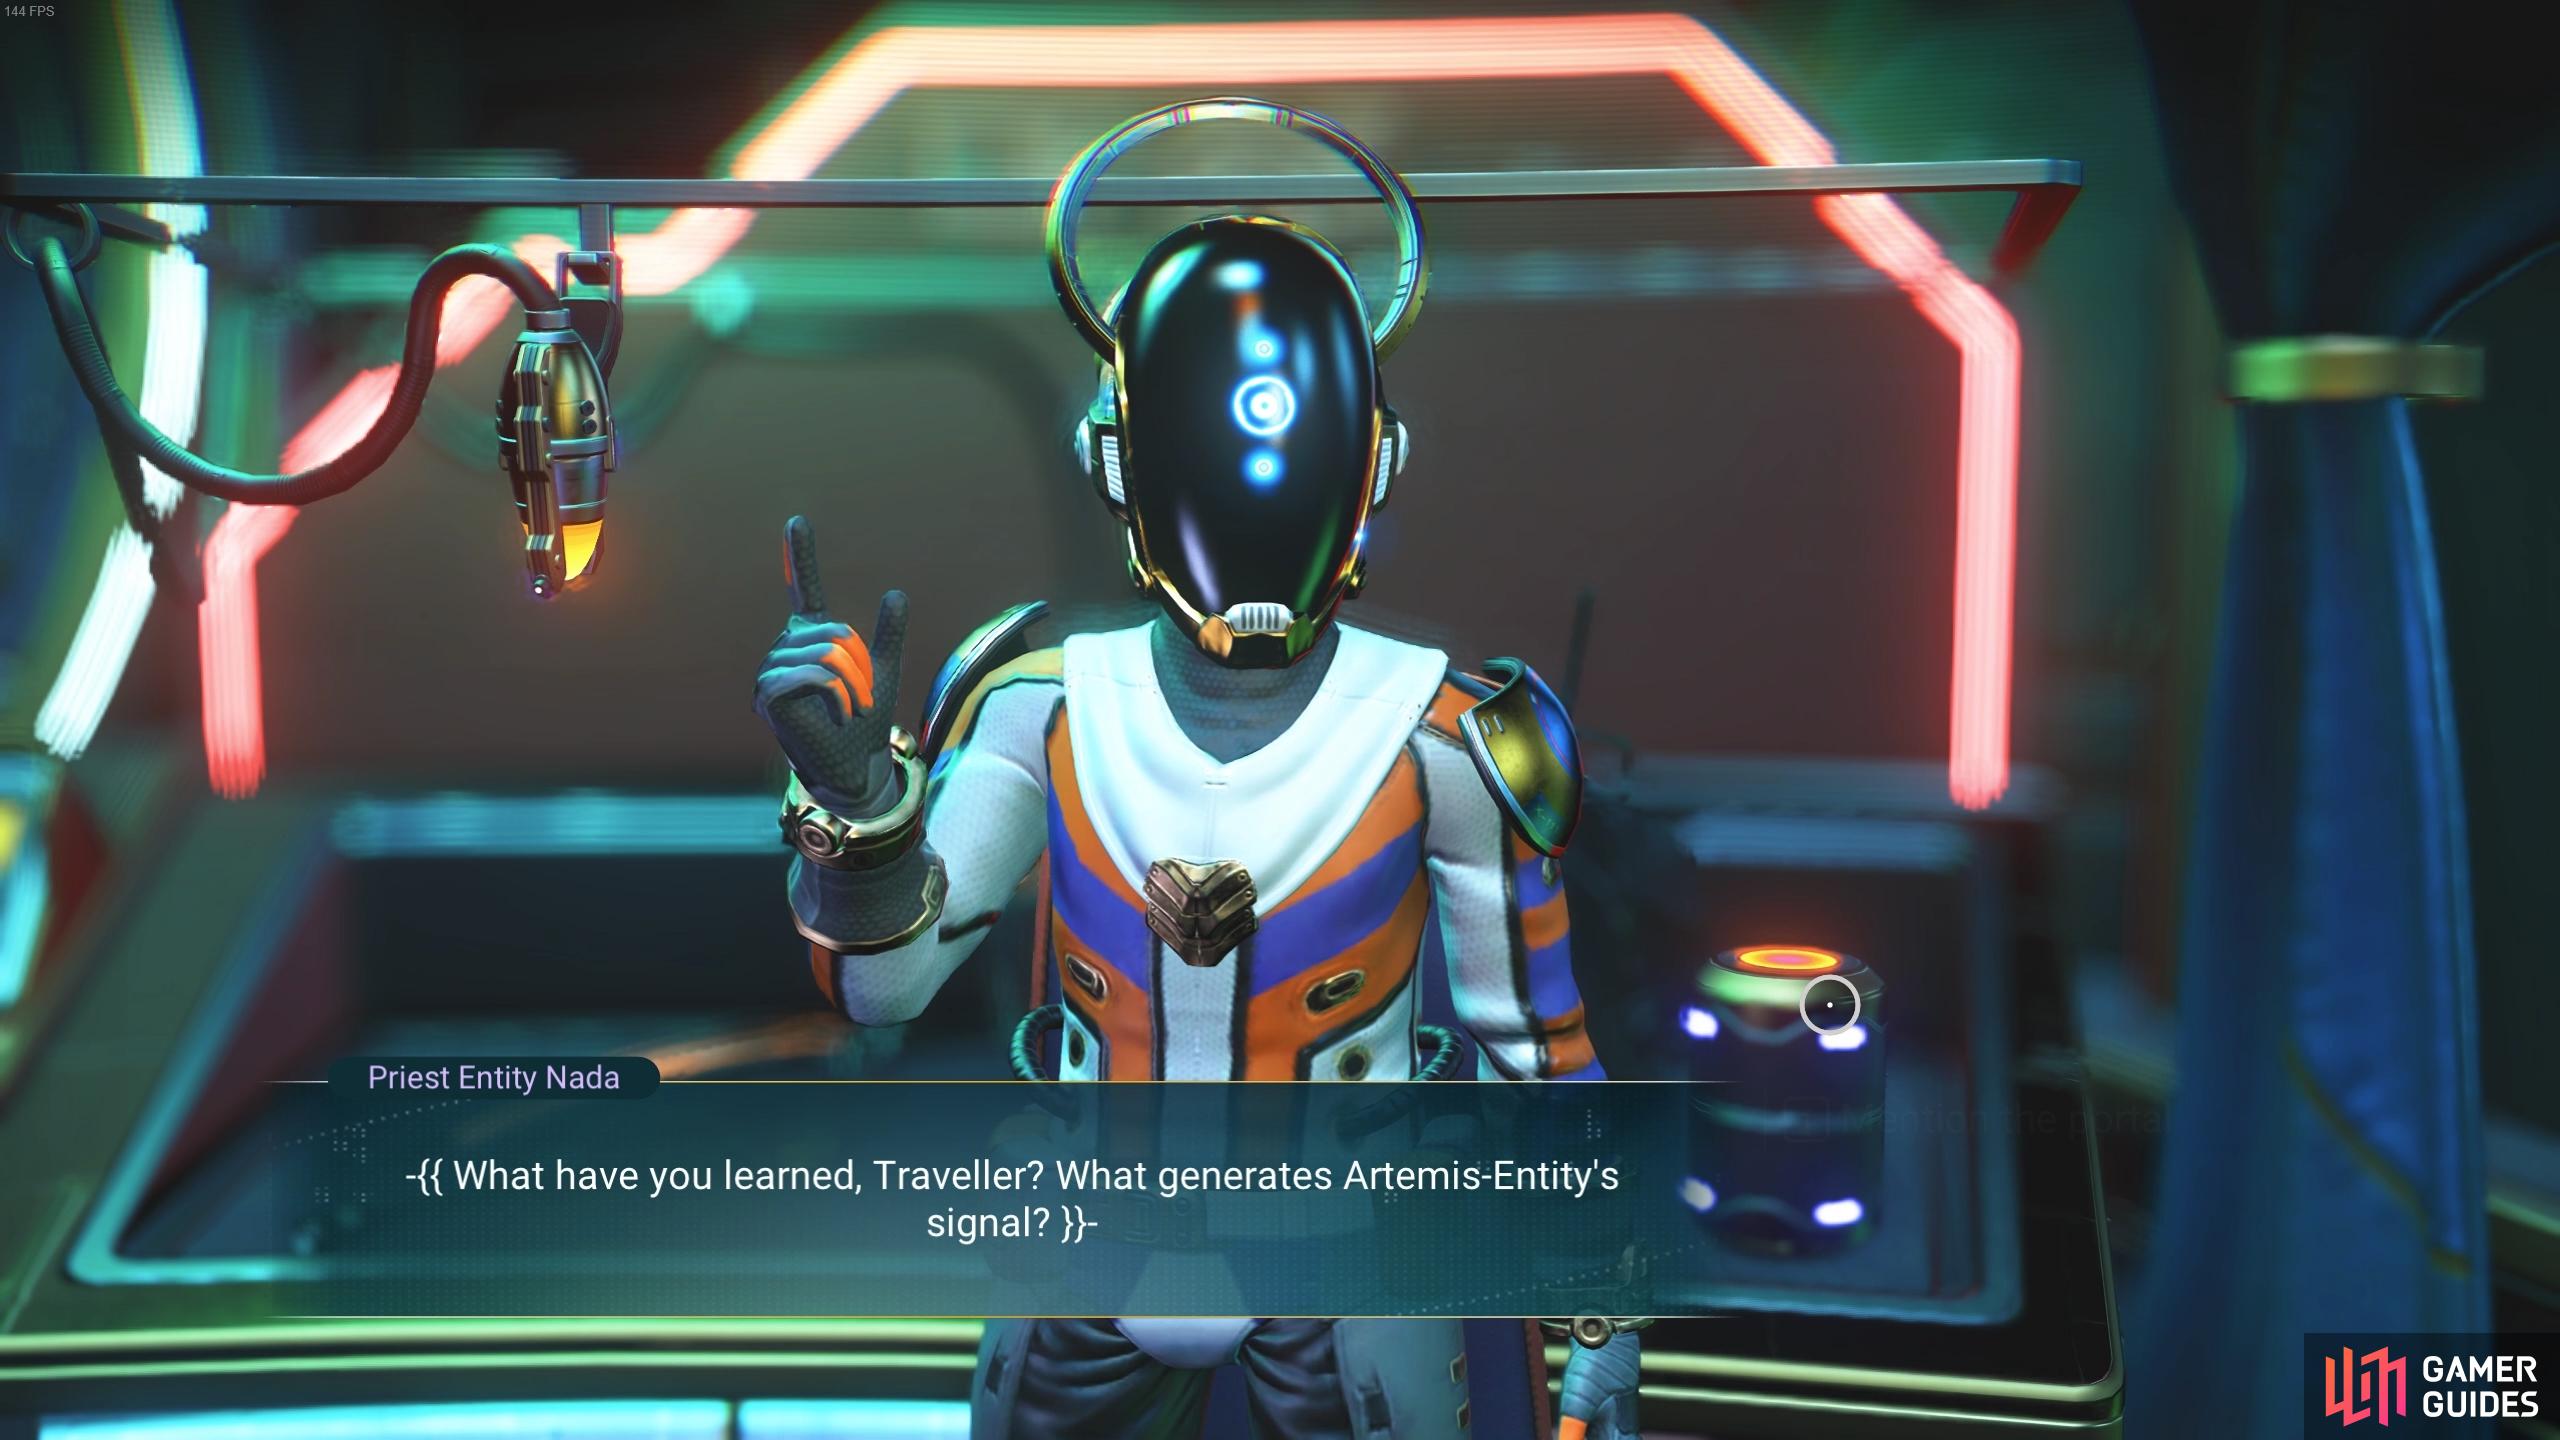 Priest Entity Nada is just one of the many useful NPCs on board the Space Anomaly.